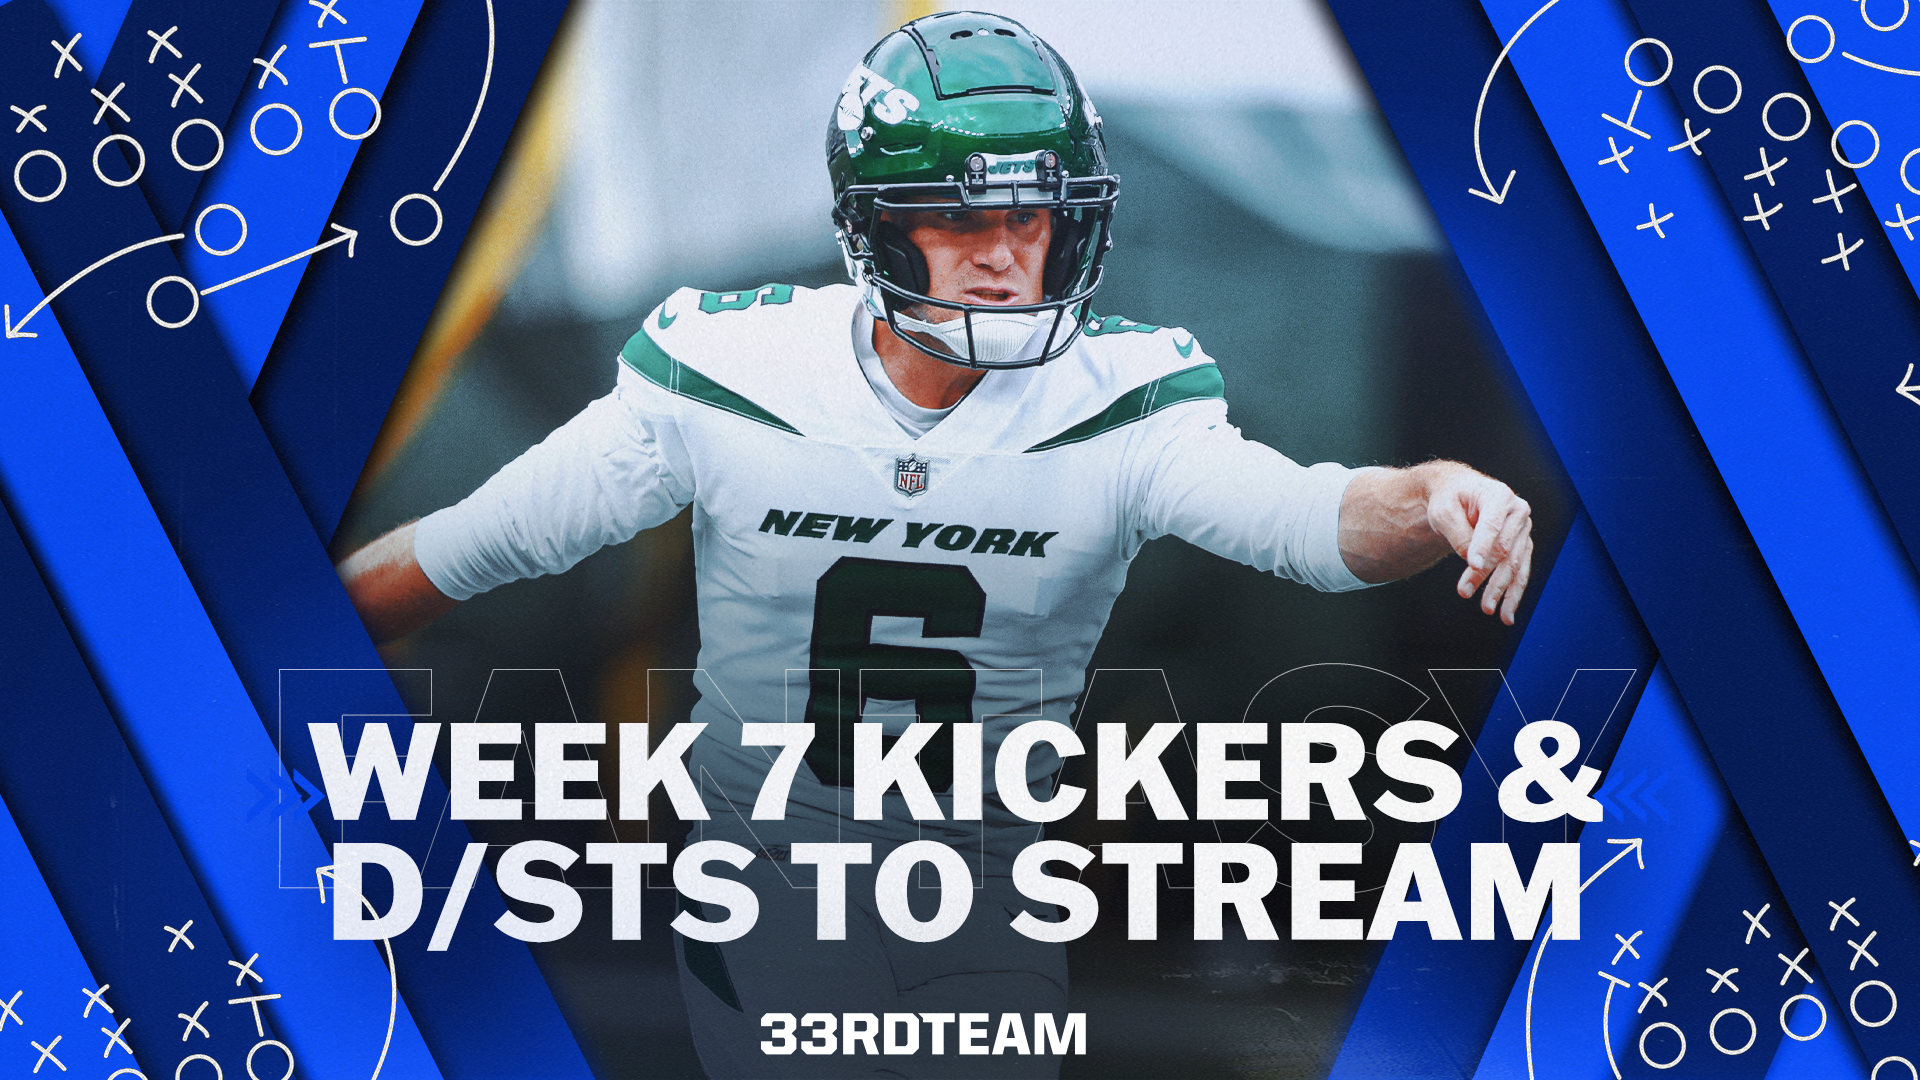 Streaming Kickers and D/STs for Week 7